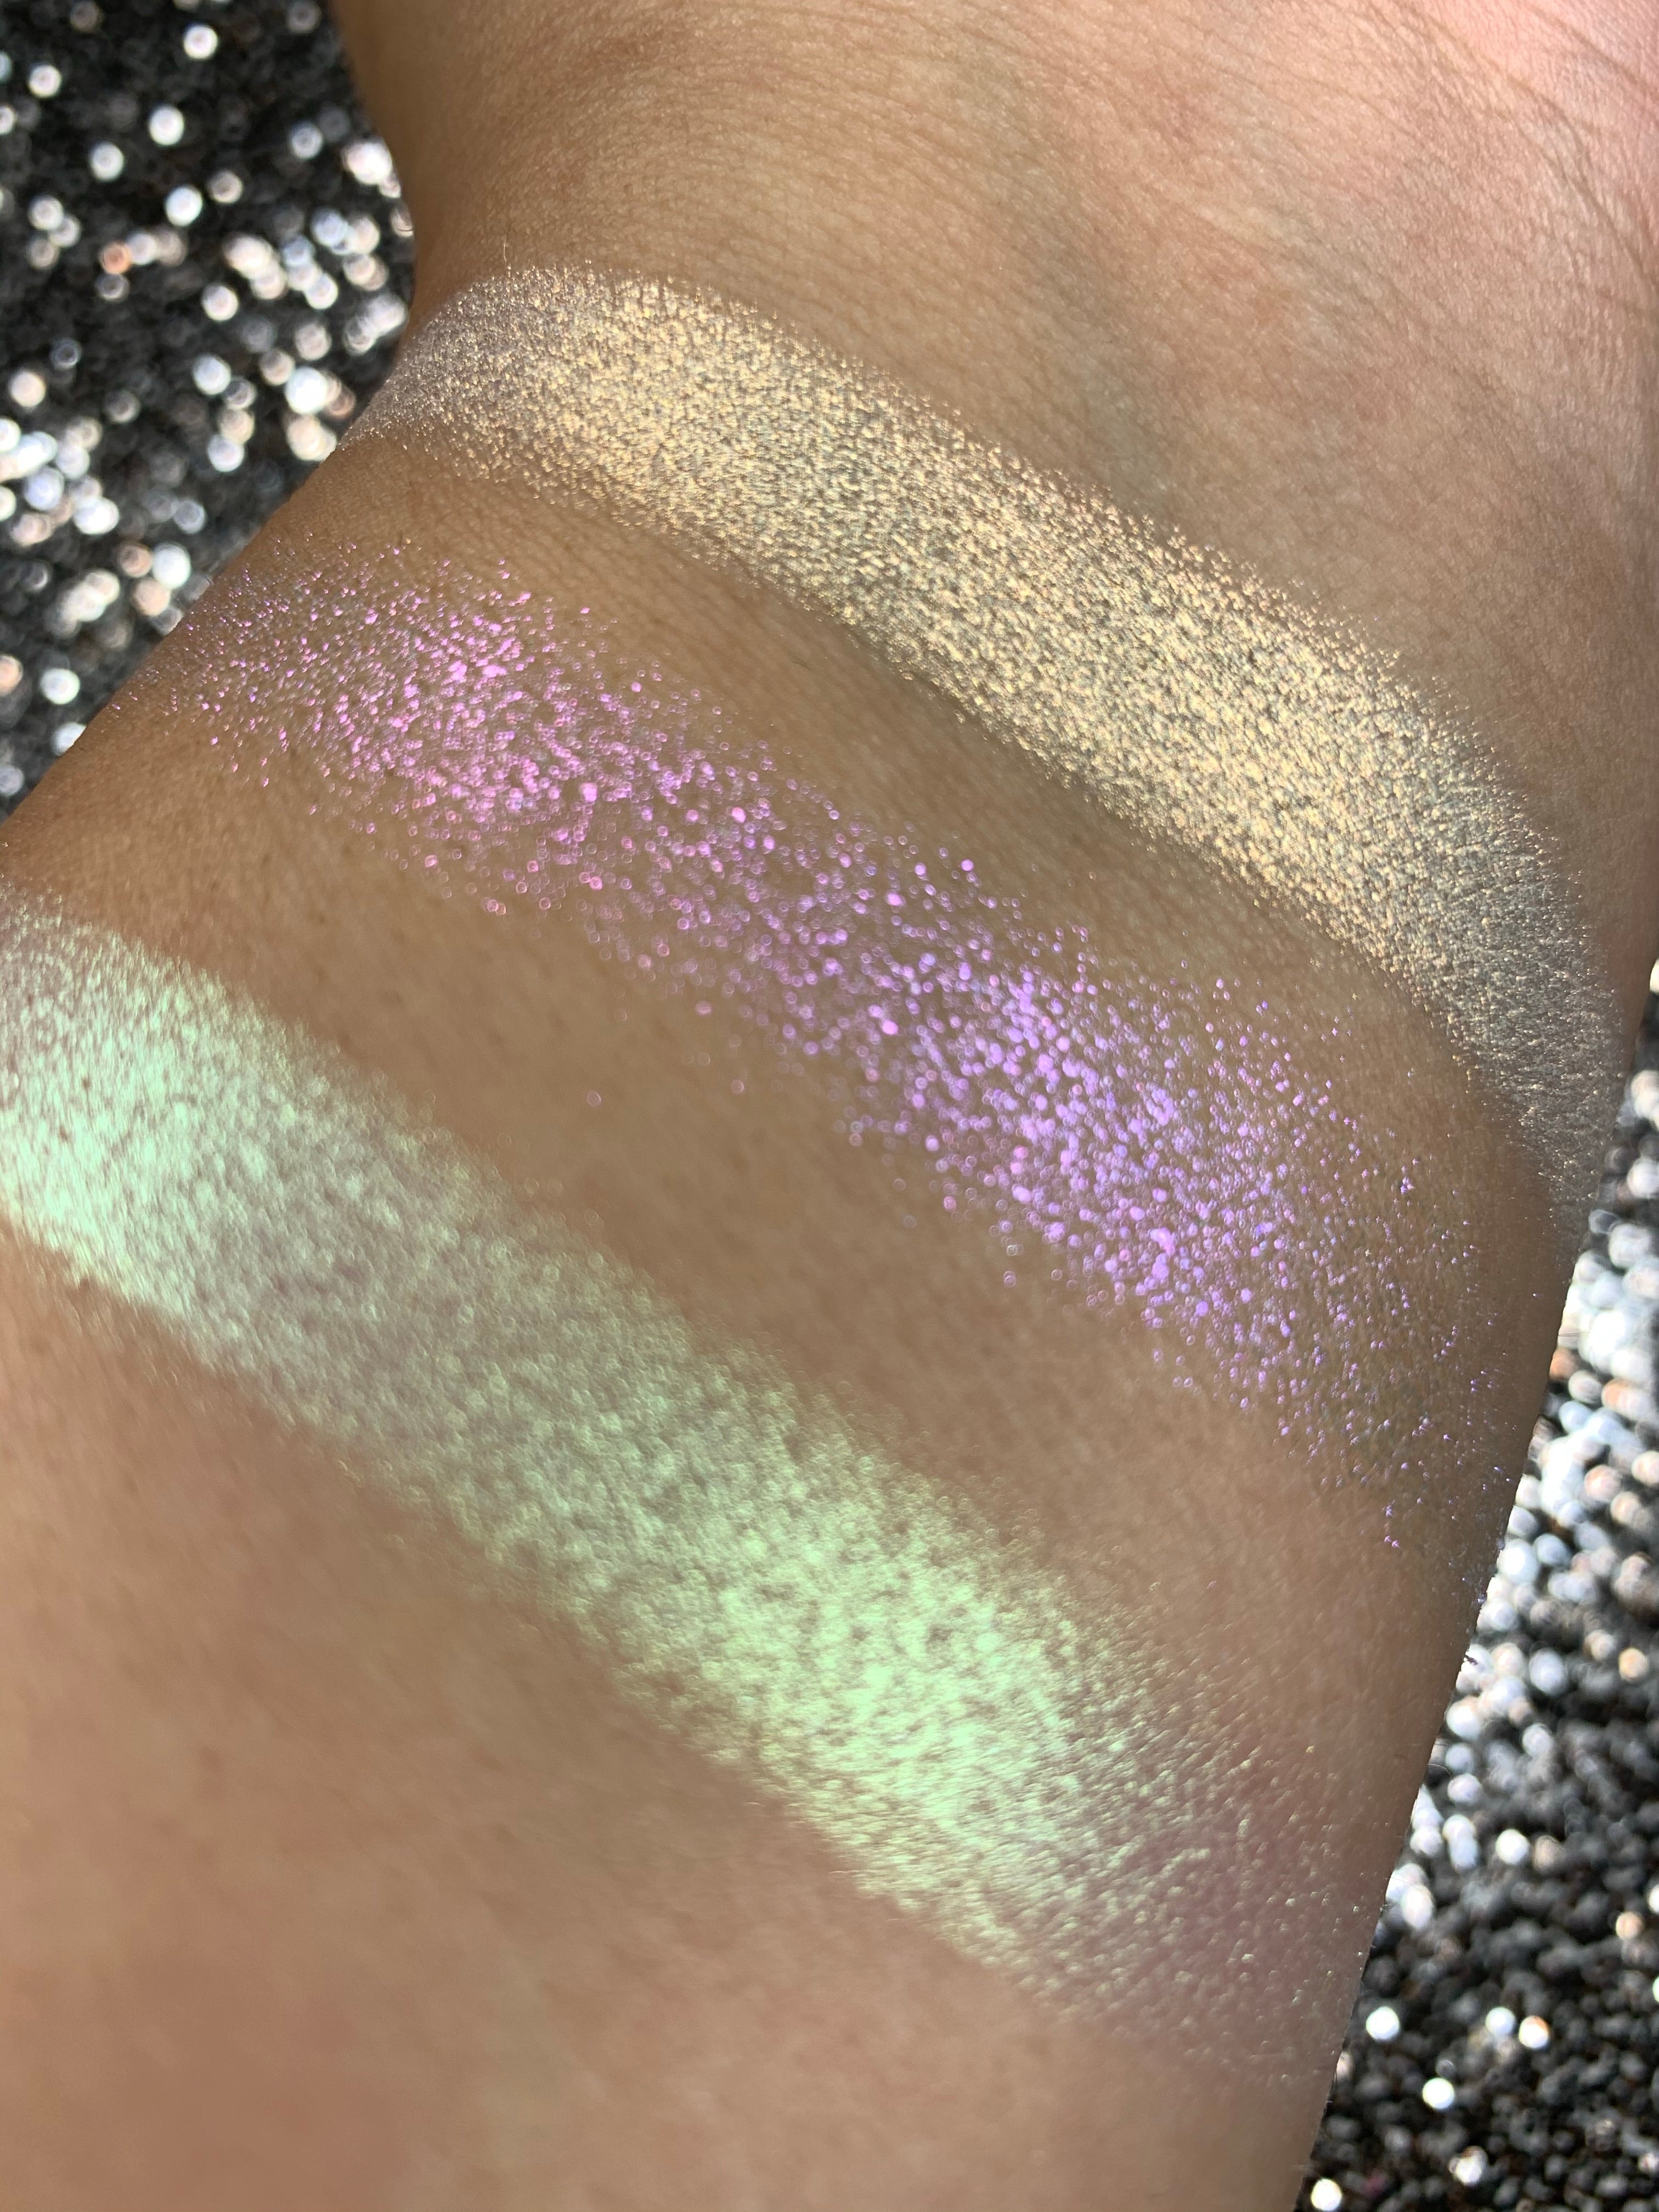 Zombie Boogers - Purrfect Glow Highlighter